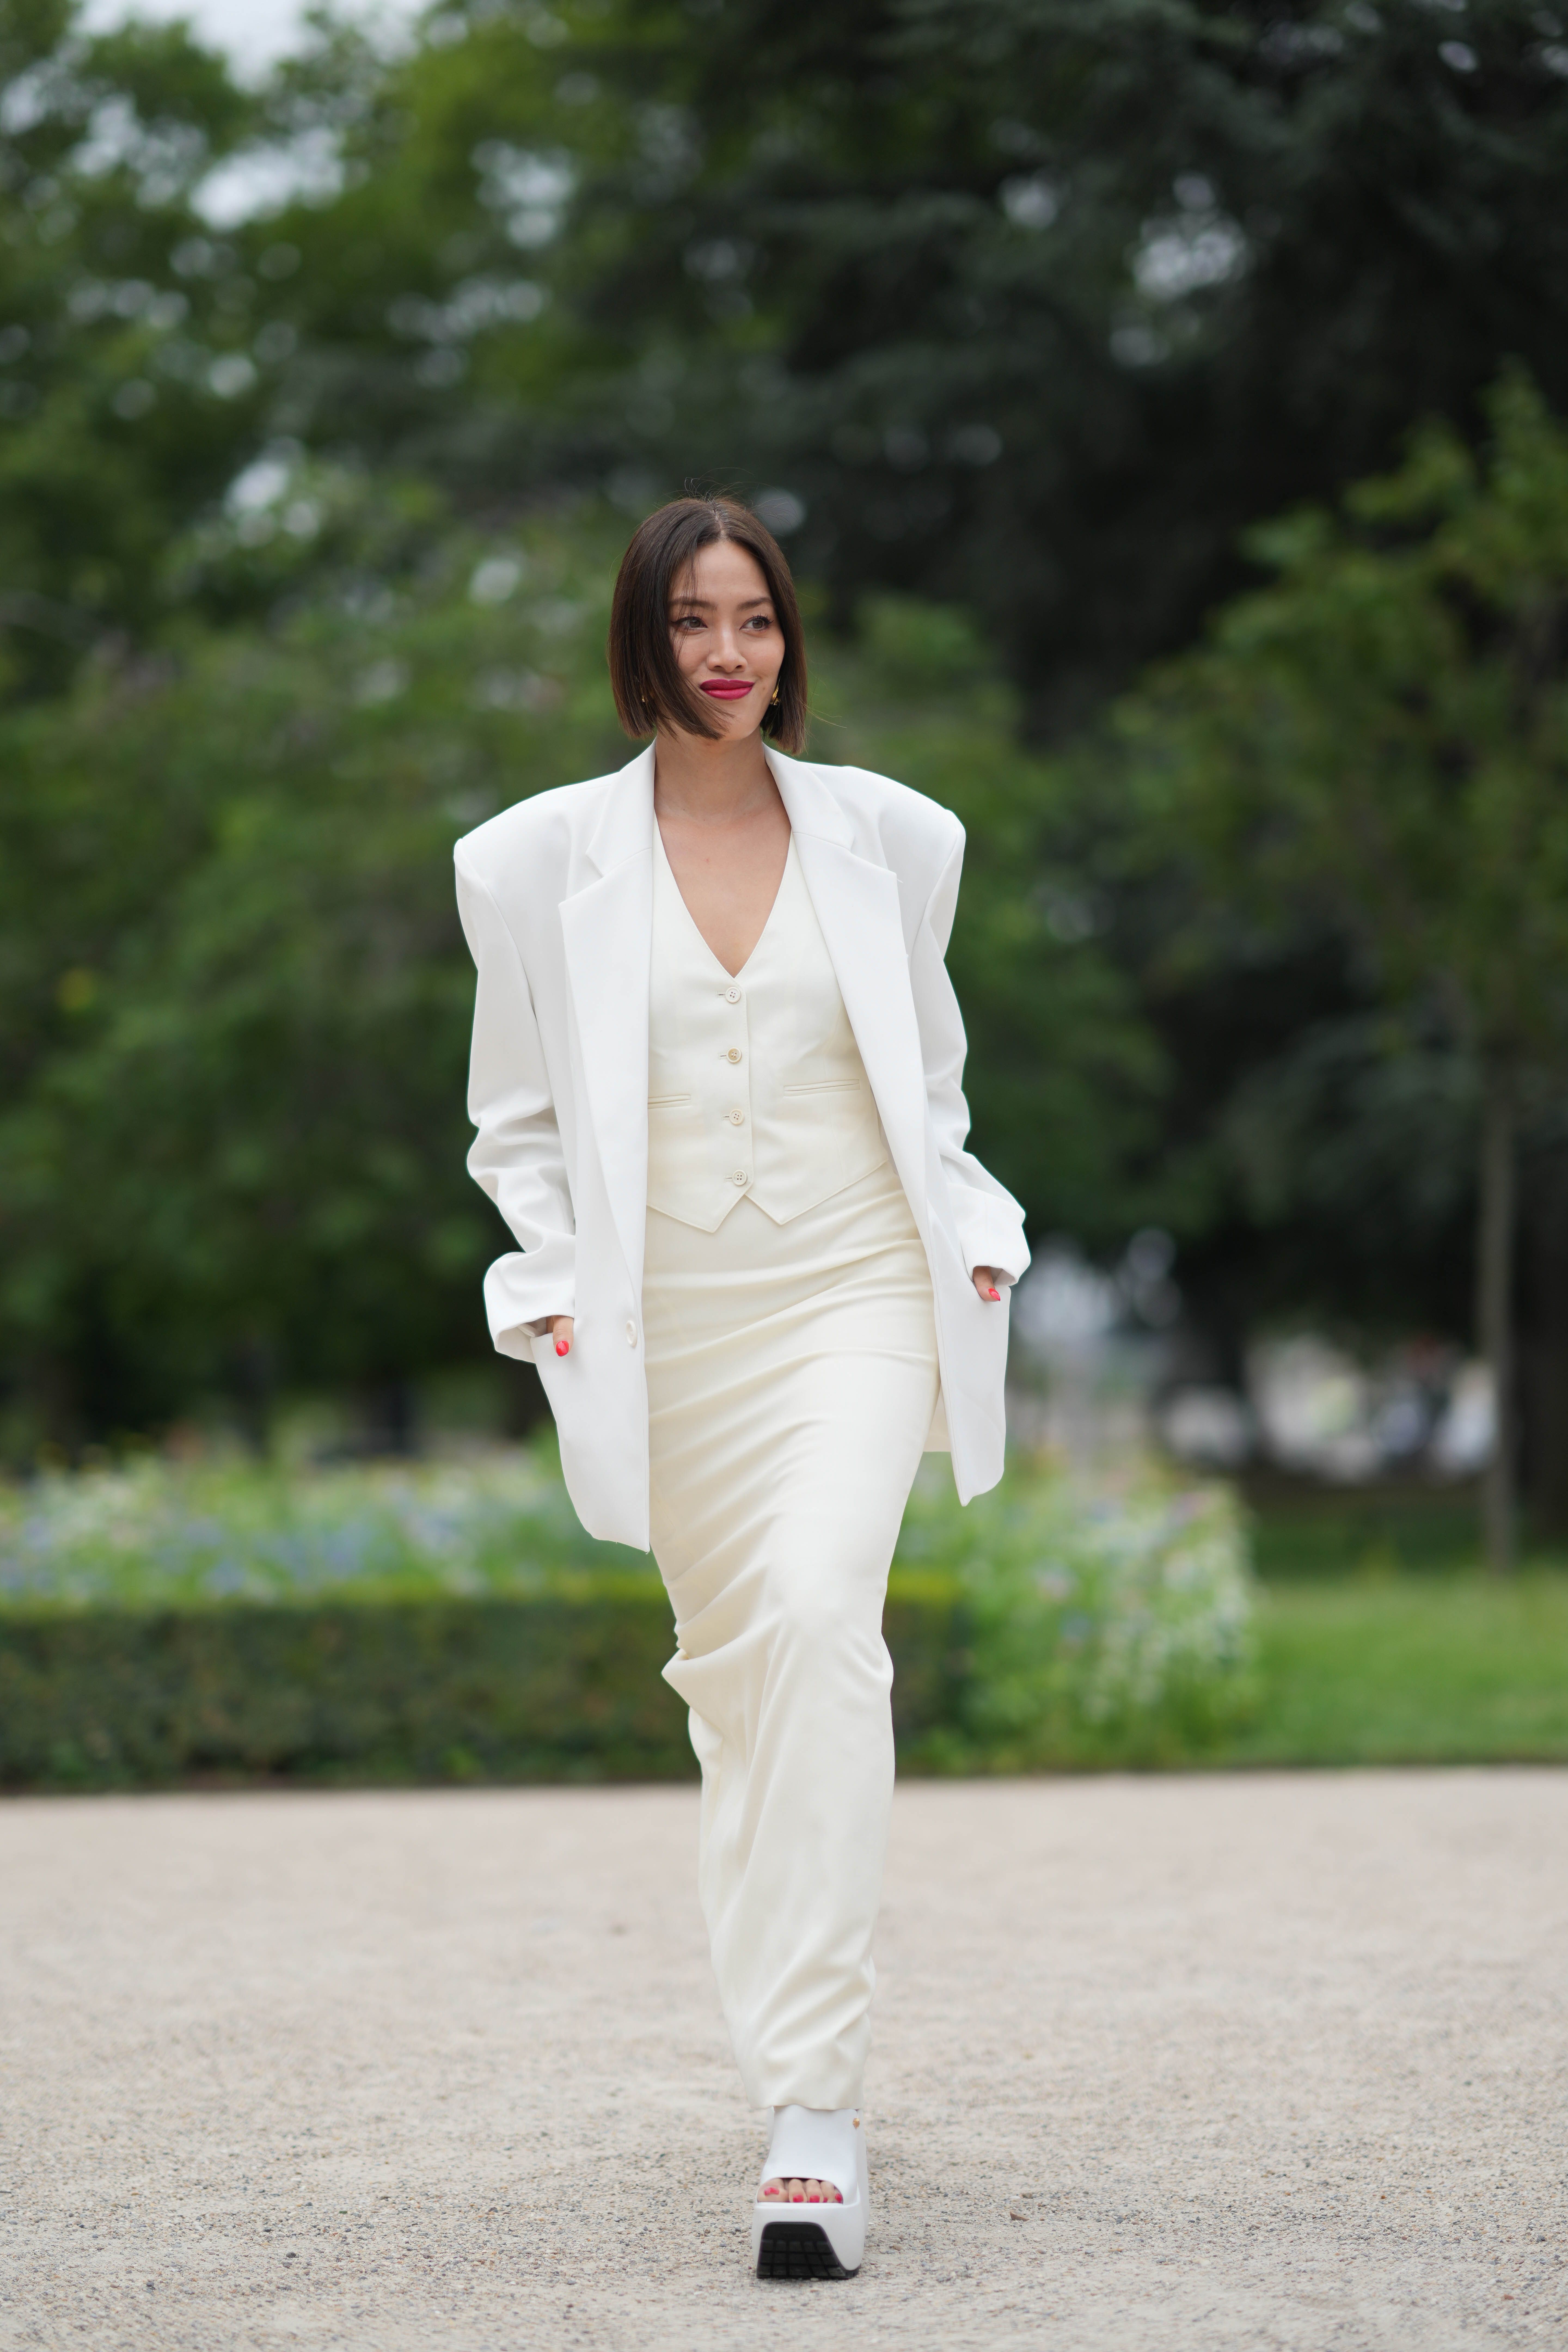  White - Women's Pantsuits / Women's Suiting: Clothing